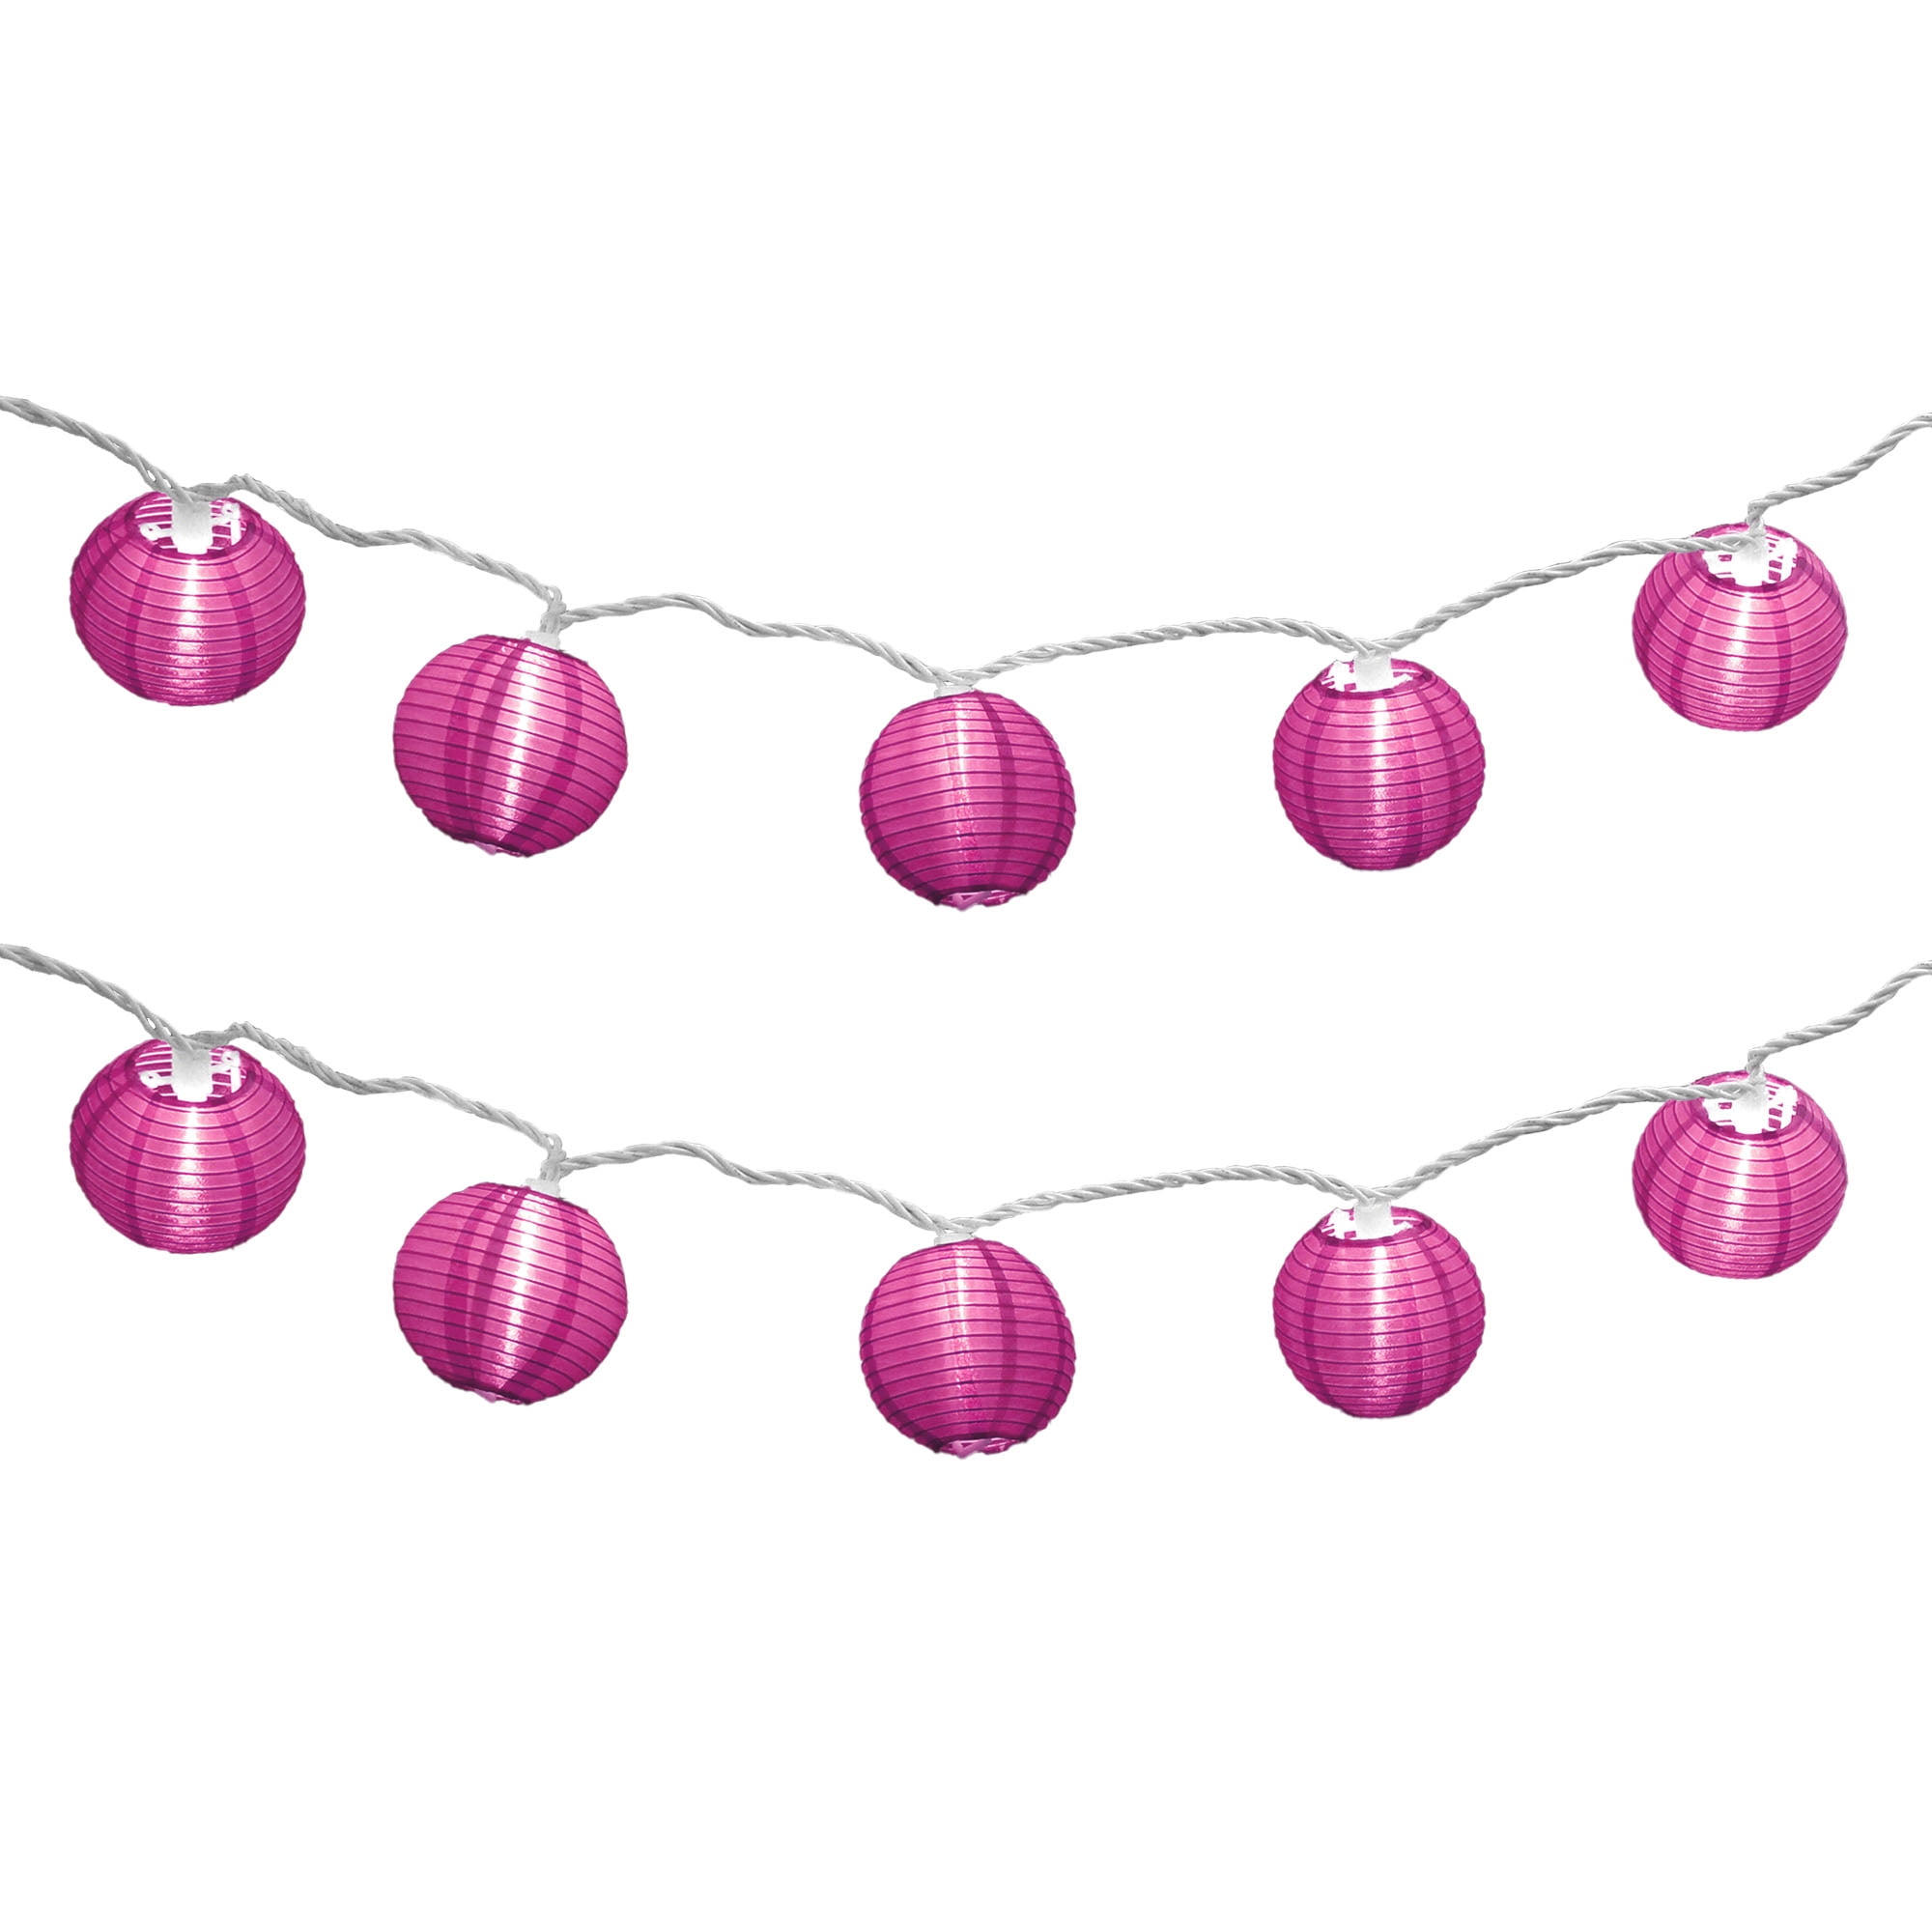 YULETIME Pink Lantern String Lights, 10 Count Nylon Lantern on 7.6' White  Wire, UL Listed 8 Spacing…See more YULETIME Pink Lantern String Lights, 10